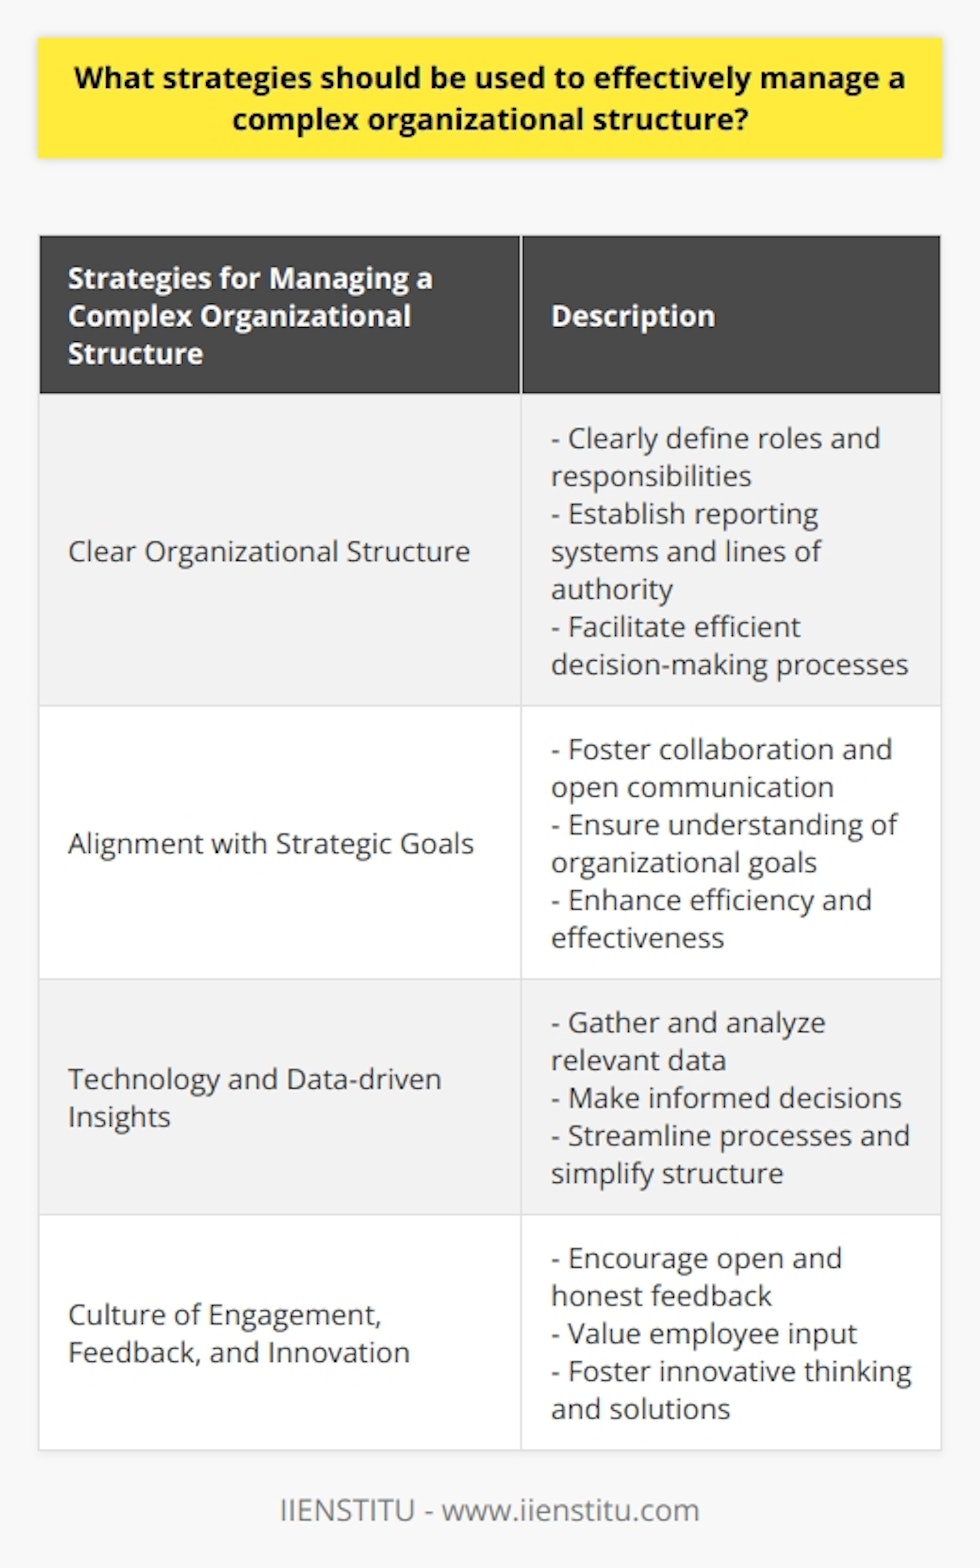 Managing a complex organizational structure can be a daunting task, but it is crucial for the smooth and effective functioning of an organization. To successfully navigate the challenges posed by organizational complexity, organizations should adopt several key strategies.First and foremost, it is important to establish a clear organizational structure. This involves clearly defining roles and responsibilities, establishing reporting systems, and delineating lines of authority and communication. By providing clarity and structure, everyone within the organization will have a clear understanding of their role and how their work contributes to the overall success of the organization. Implementing a hierarchical structure can further ensure that communication flows in an orderly manner, facilitating efficient decision-making processes.Moreover, organizations should strive to align their teams with the strategic goals of the organization. This can be achieved by fostering an environment of collaboration and open communication. Departments, groups, and employees should have a clear understanding of the organization's strategic goals and how their individual roles fit into those goals. By encouraging cross-functional collaboration and shared knowledge, organizations can enhance efficiency and effectiveness in achieving their desired outcomes.Incorporating technology and data-driven insights into the decision-making processes is another valuable strategy. Gathering and analyzing relevant data can provide organizations with valuable insights into patterns and potential issues. This data-driven approach allows for more informed decision-making, enabling organizations to address challenges more effectively. Additionally, implementing appropriate technology solutions can streamline processes and simplify the overall organizational structure.Lastly, organizations should foster a culture of engagement, feedback, and innovation. Encouraging open and honest feedback from employees ensures that their input is valued and that everyone is aligned with the organization's direction. Furthermore, cultivating an environment where new ideas and innovative thinking are encouraged can lead to improved solutions for complex problems. This culture of engagement and innovation fosters a sense of ownership and commitment among employees, contributing to the effective management of a complex organizational structure.In conclusion, managing a complex organizational structure requires thoughtful strategies. Establishing a clear organizational structure, aligning teams with strategic goals, leveraging technology and data-driven insights, and cultivating a culture of engagement, feedback, and innovation are all vital strategies for effectively managing a complex organizational structure. By implementing these strategies, organizations can navigate the challenges of complexity and ensure their long-term success.